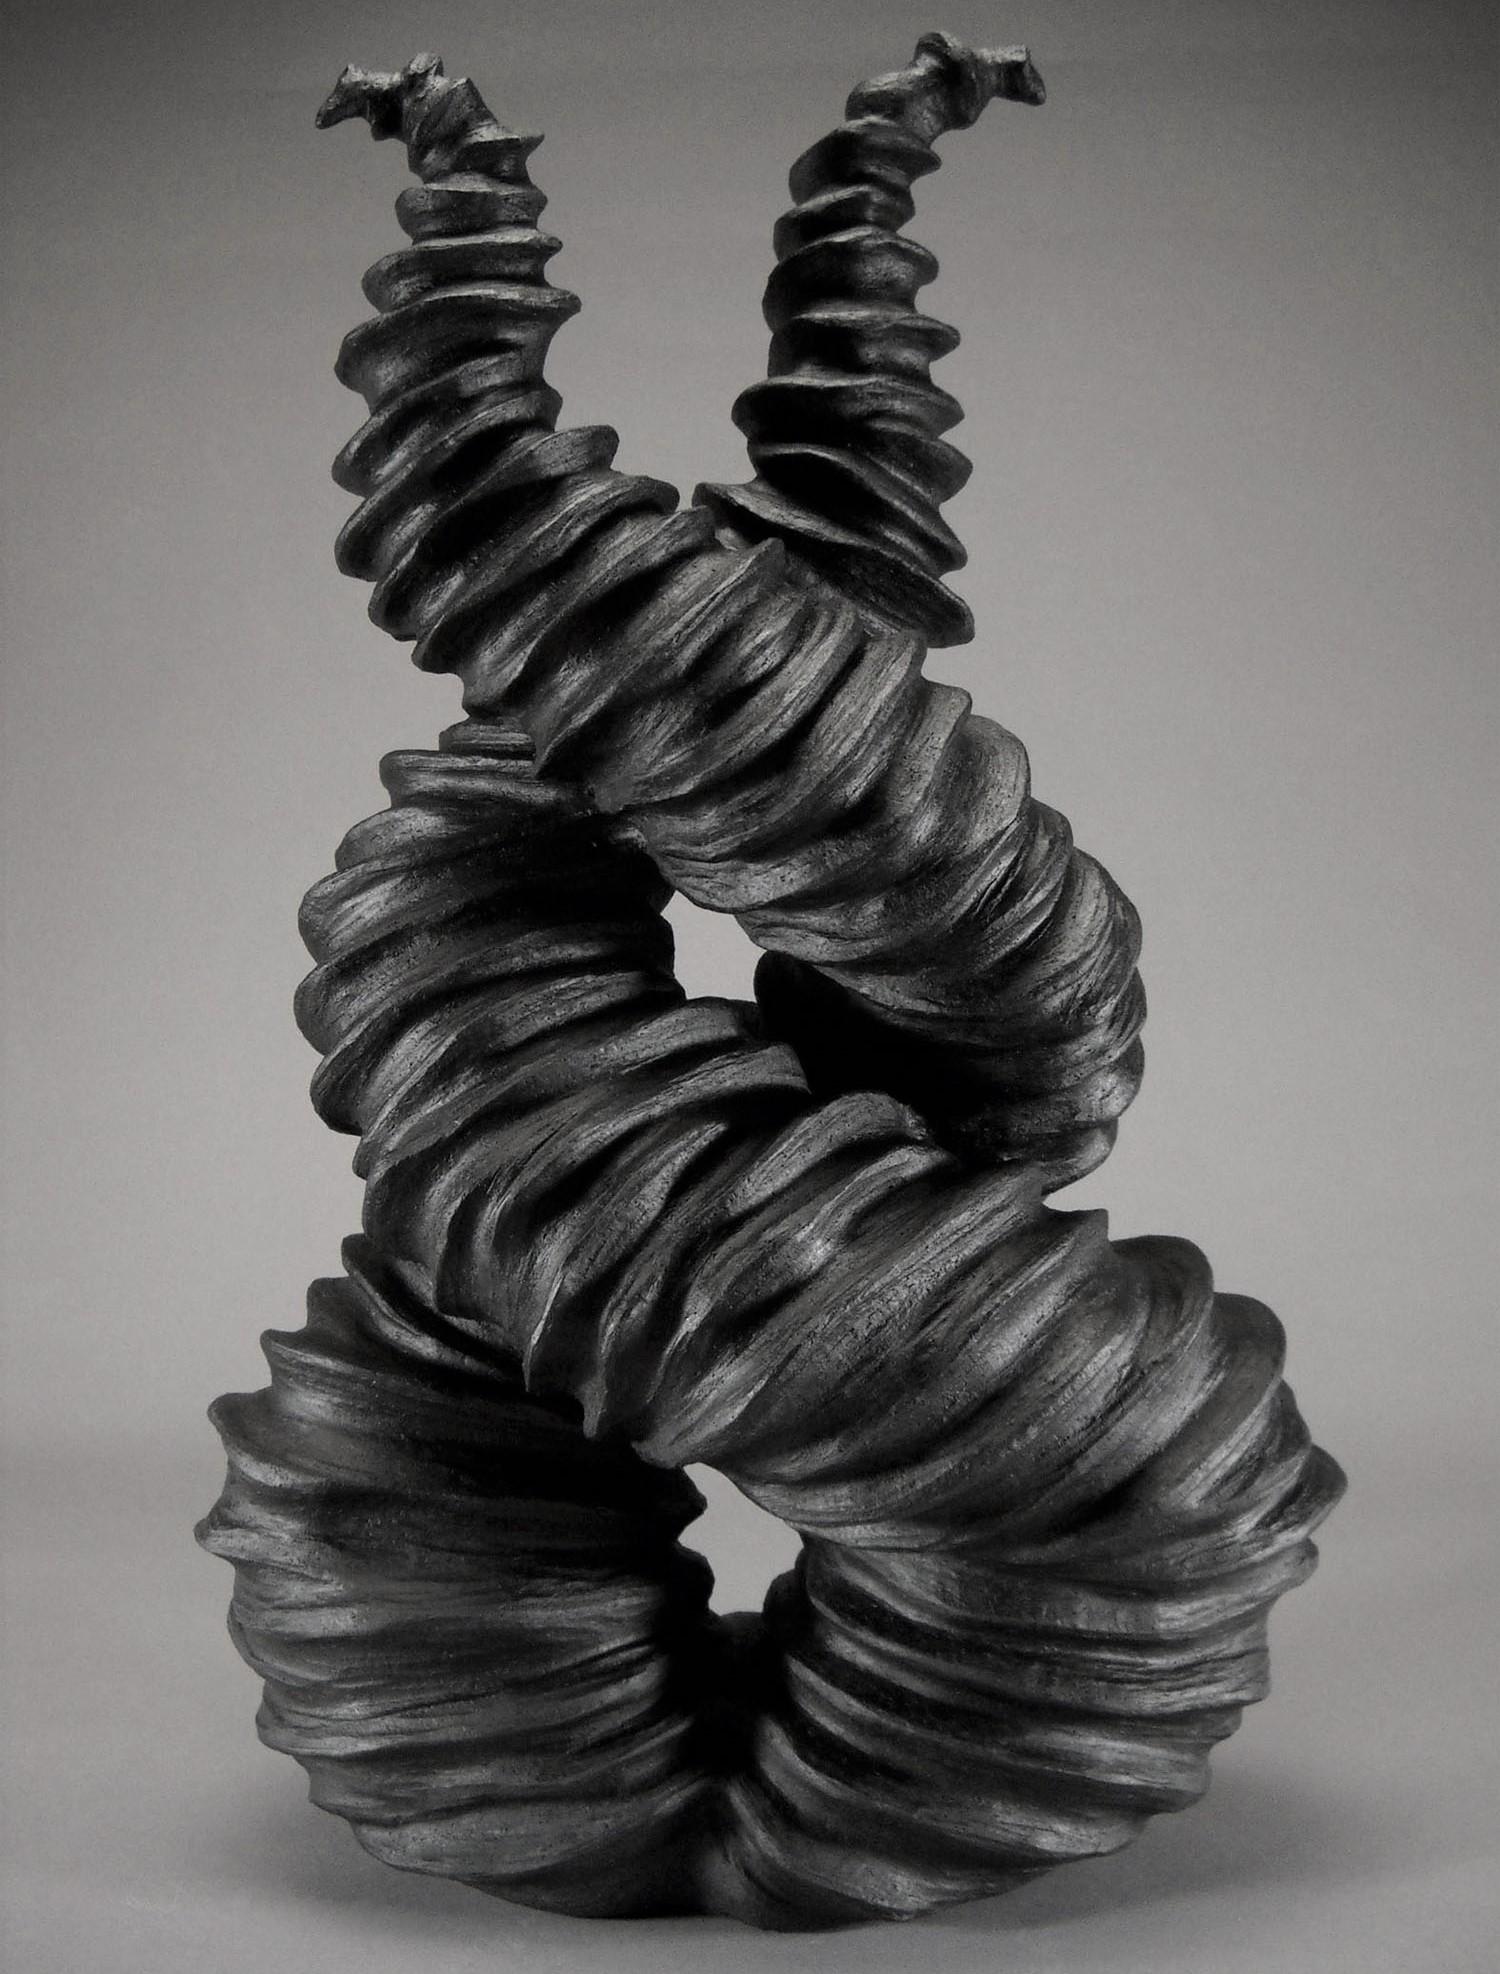 Intertwined, Abstract Ceramic Sculpture, 2018